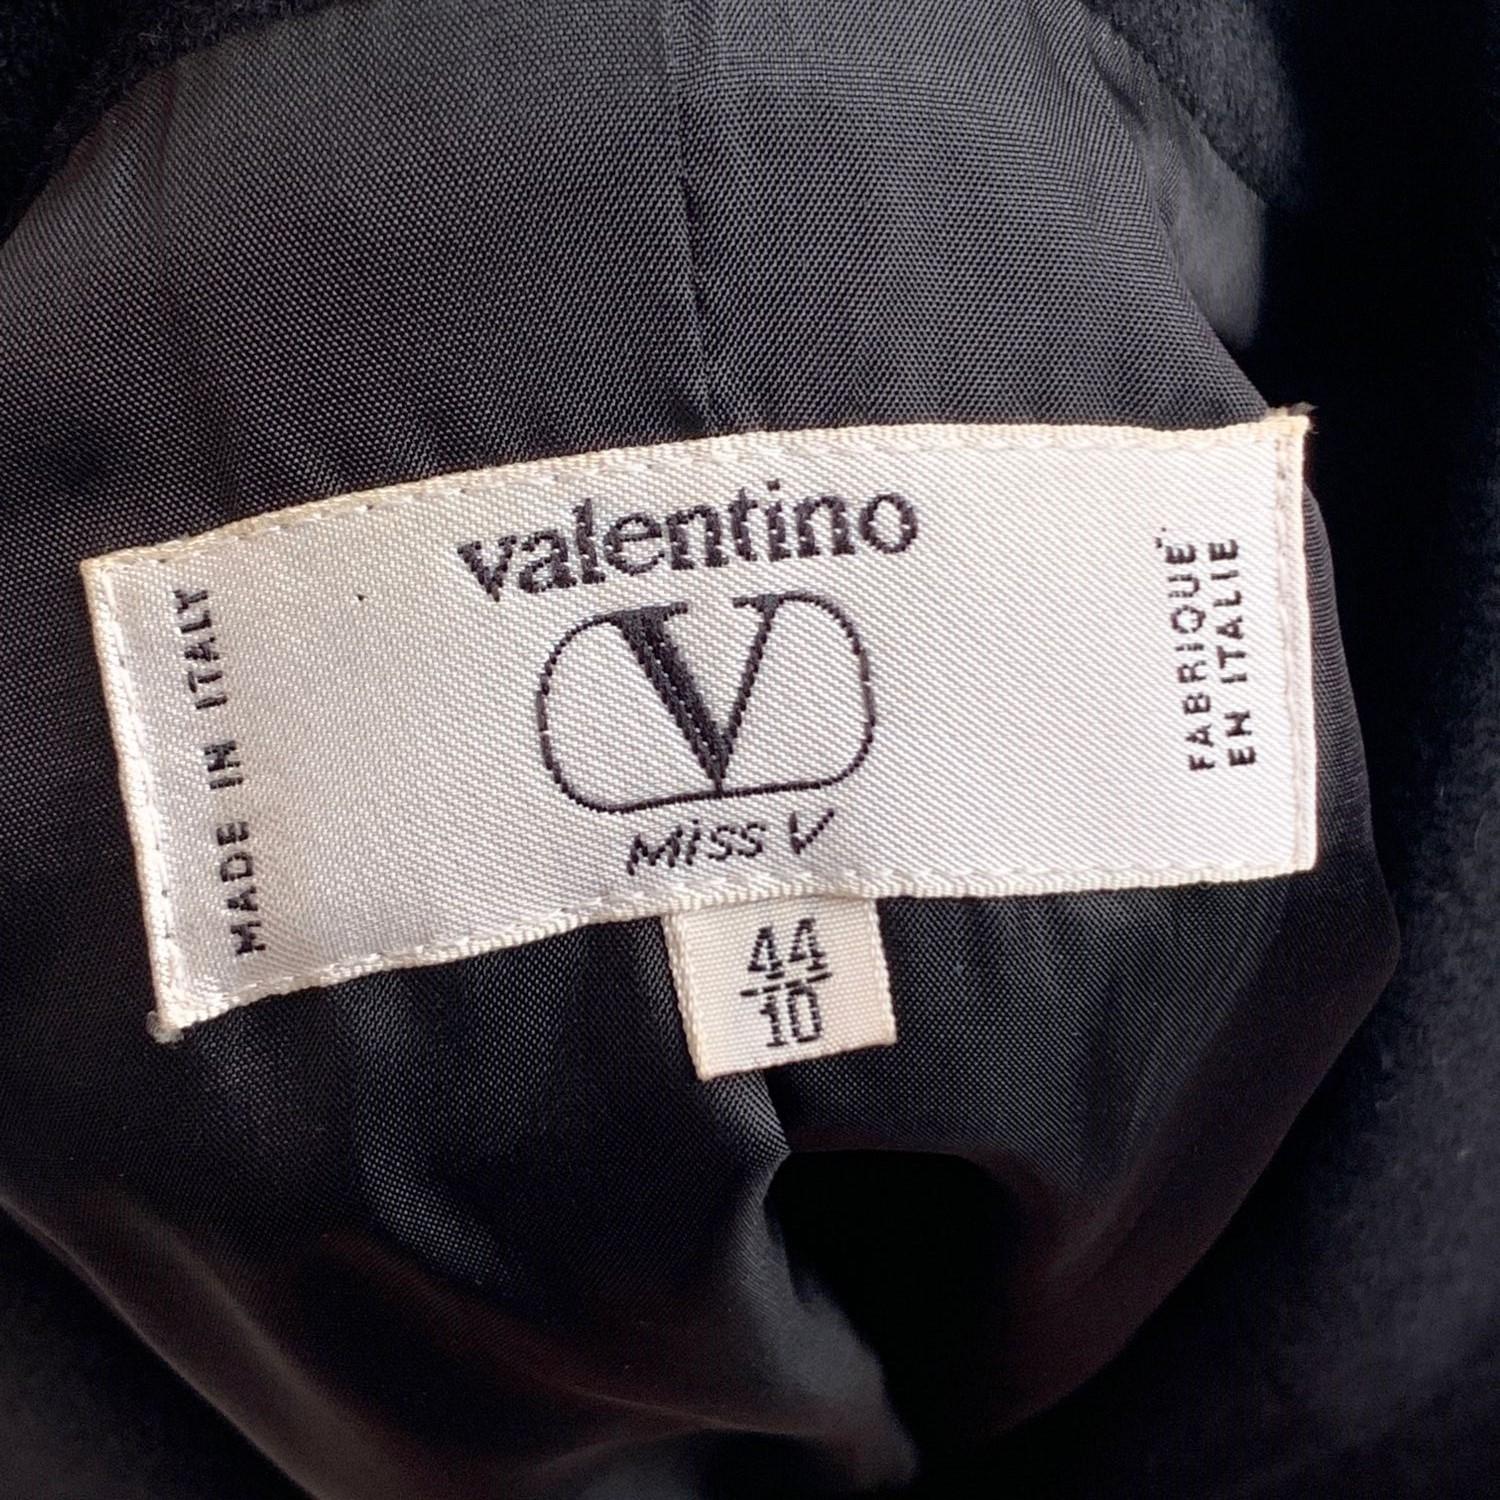 Vintage Valentino Miss V black double-breasted blazer crafted of Loro Piana pure cashmere fabric. Button closure on the front. Long sleeve styling with buttoned cuffs. Composition: 100% cashmere. Lined. 2 pockets on the waist. Size: 44 IT (it should